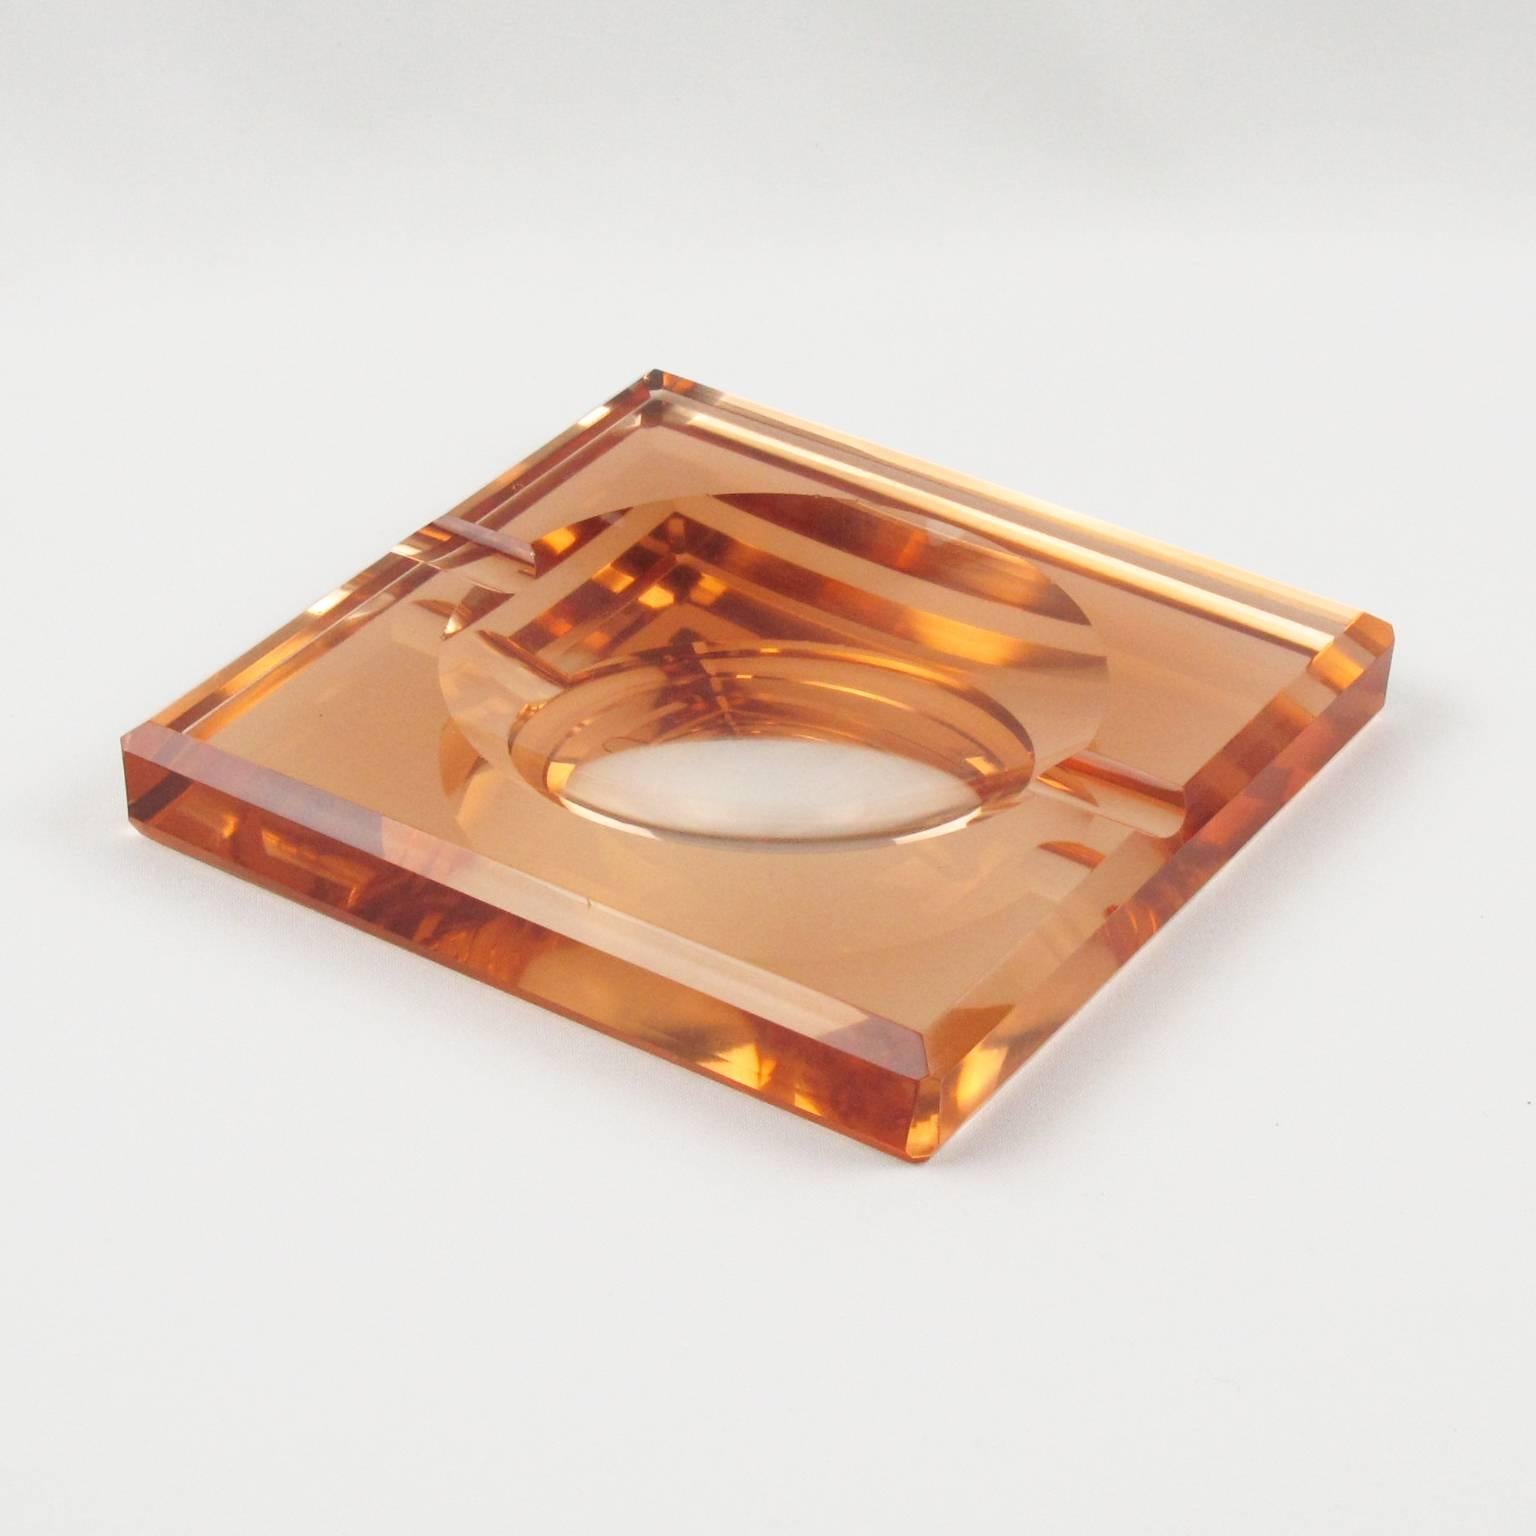 Rare Art Deco mirrored cigar ashtray or desk tidy or vide-poche by French designer Jean Luce, circa 1930s. Square shape with thick copper or peach mirrored glass slab with sanded and polished round motif in the centre with deep bevelling all around.